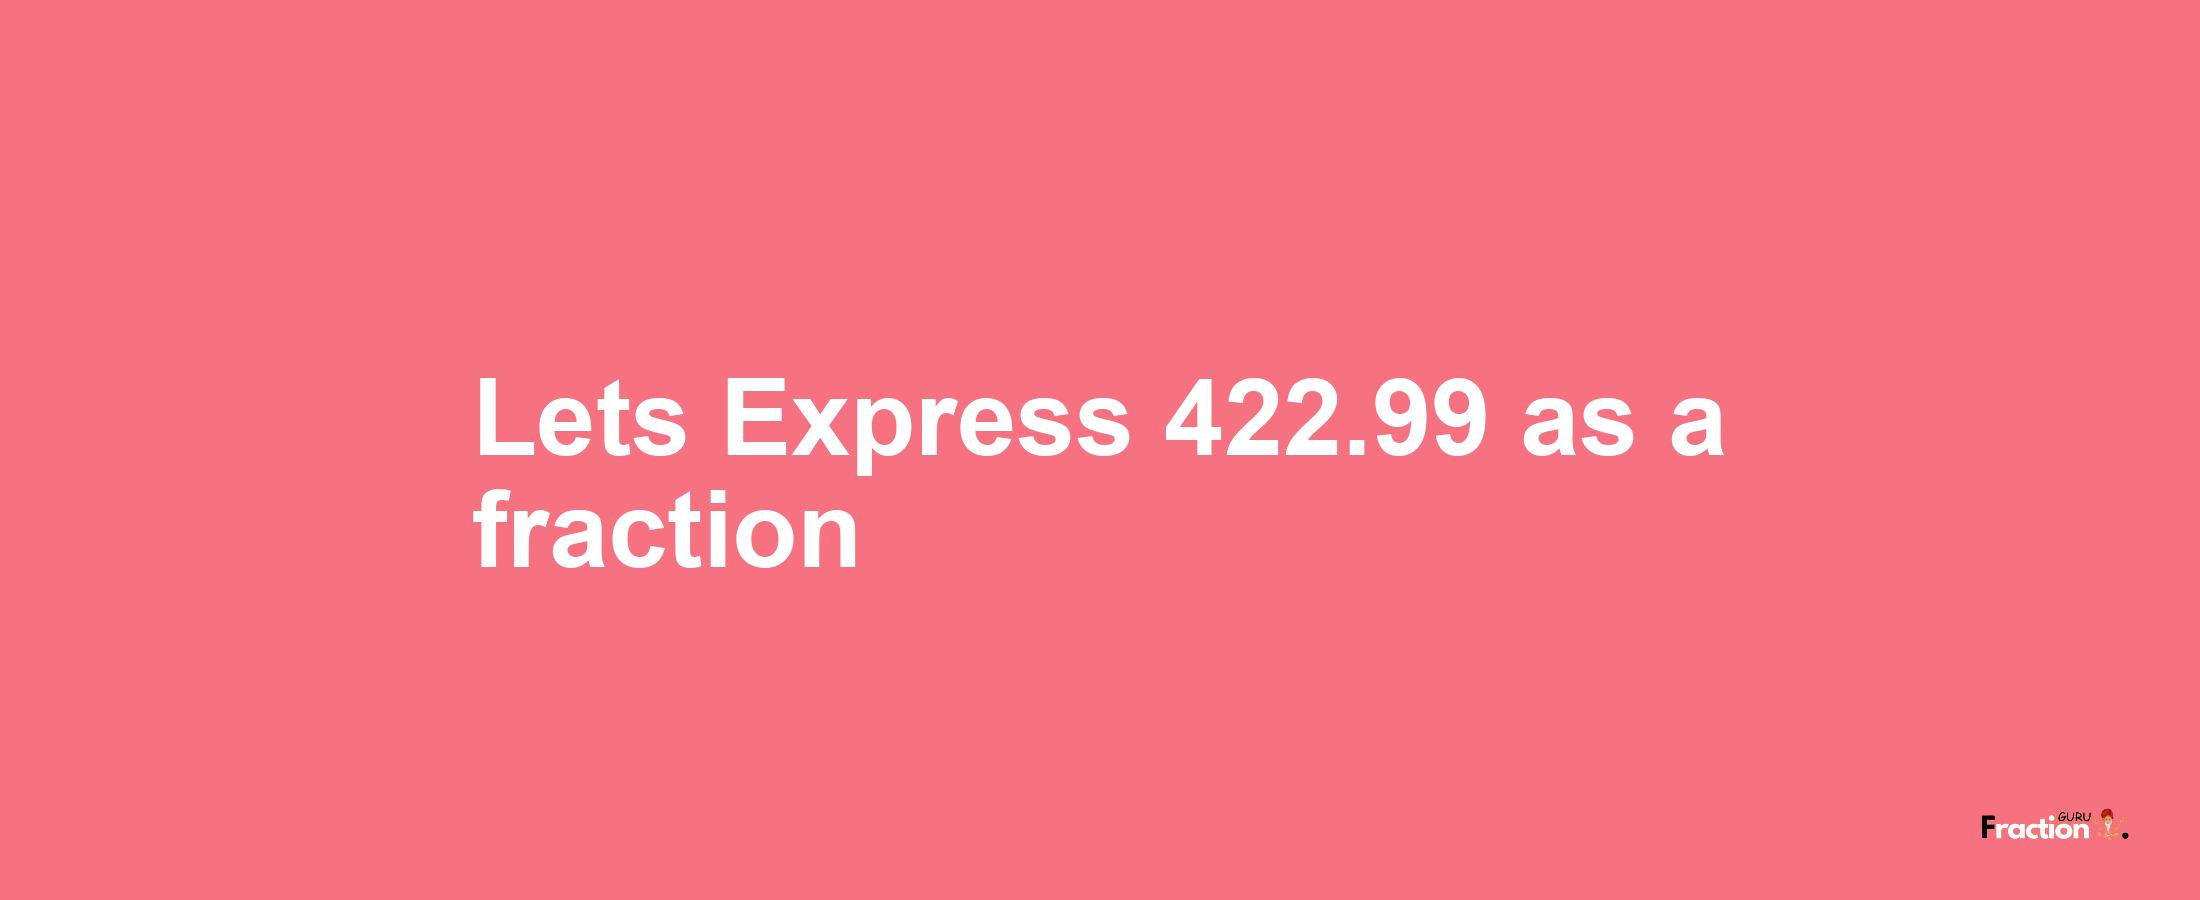 Lets Express 422.99 as afraction